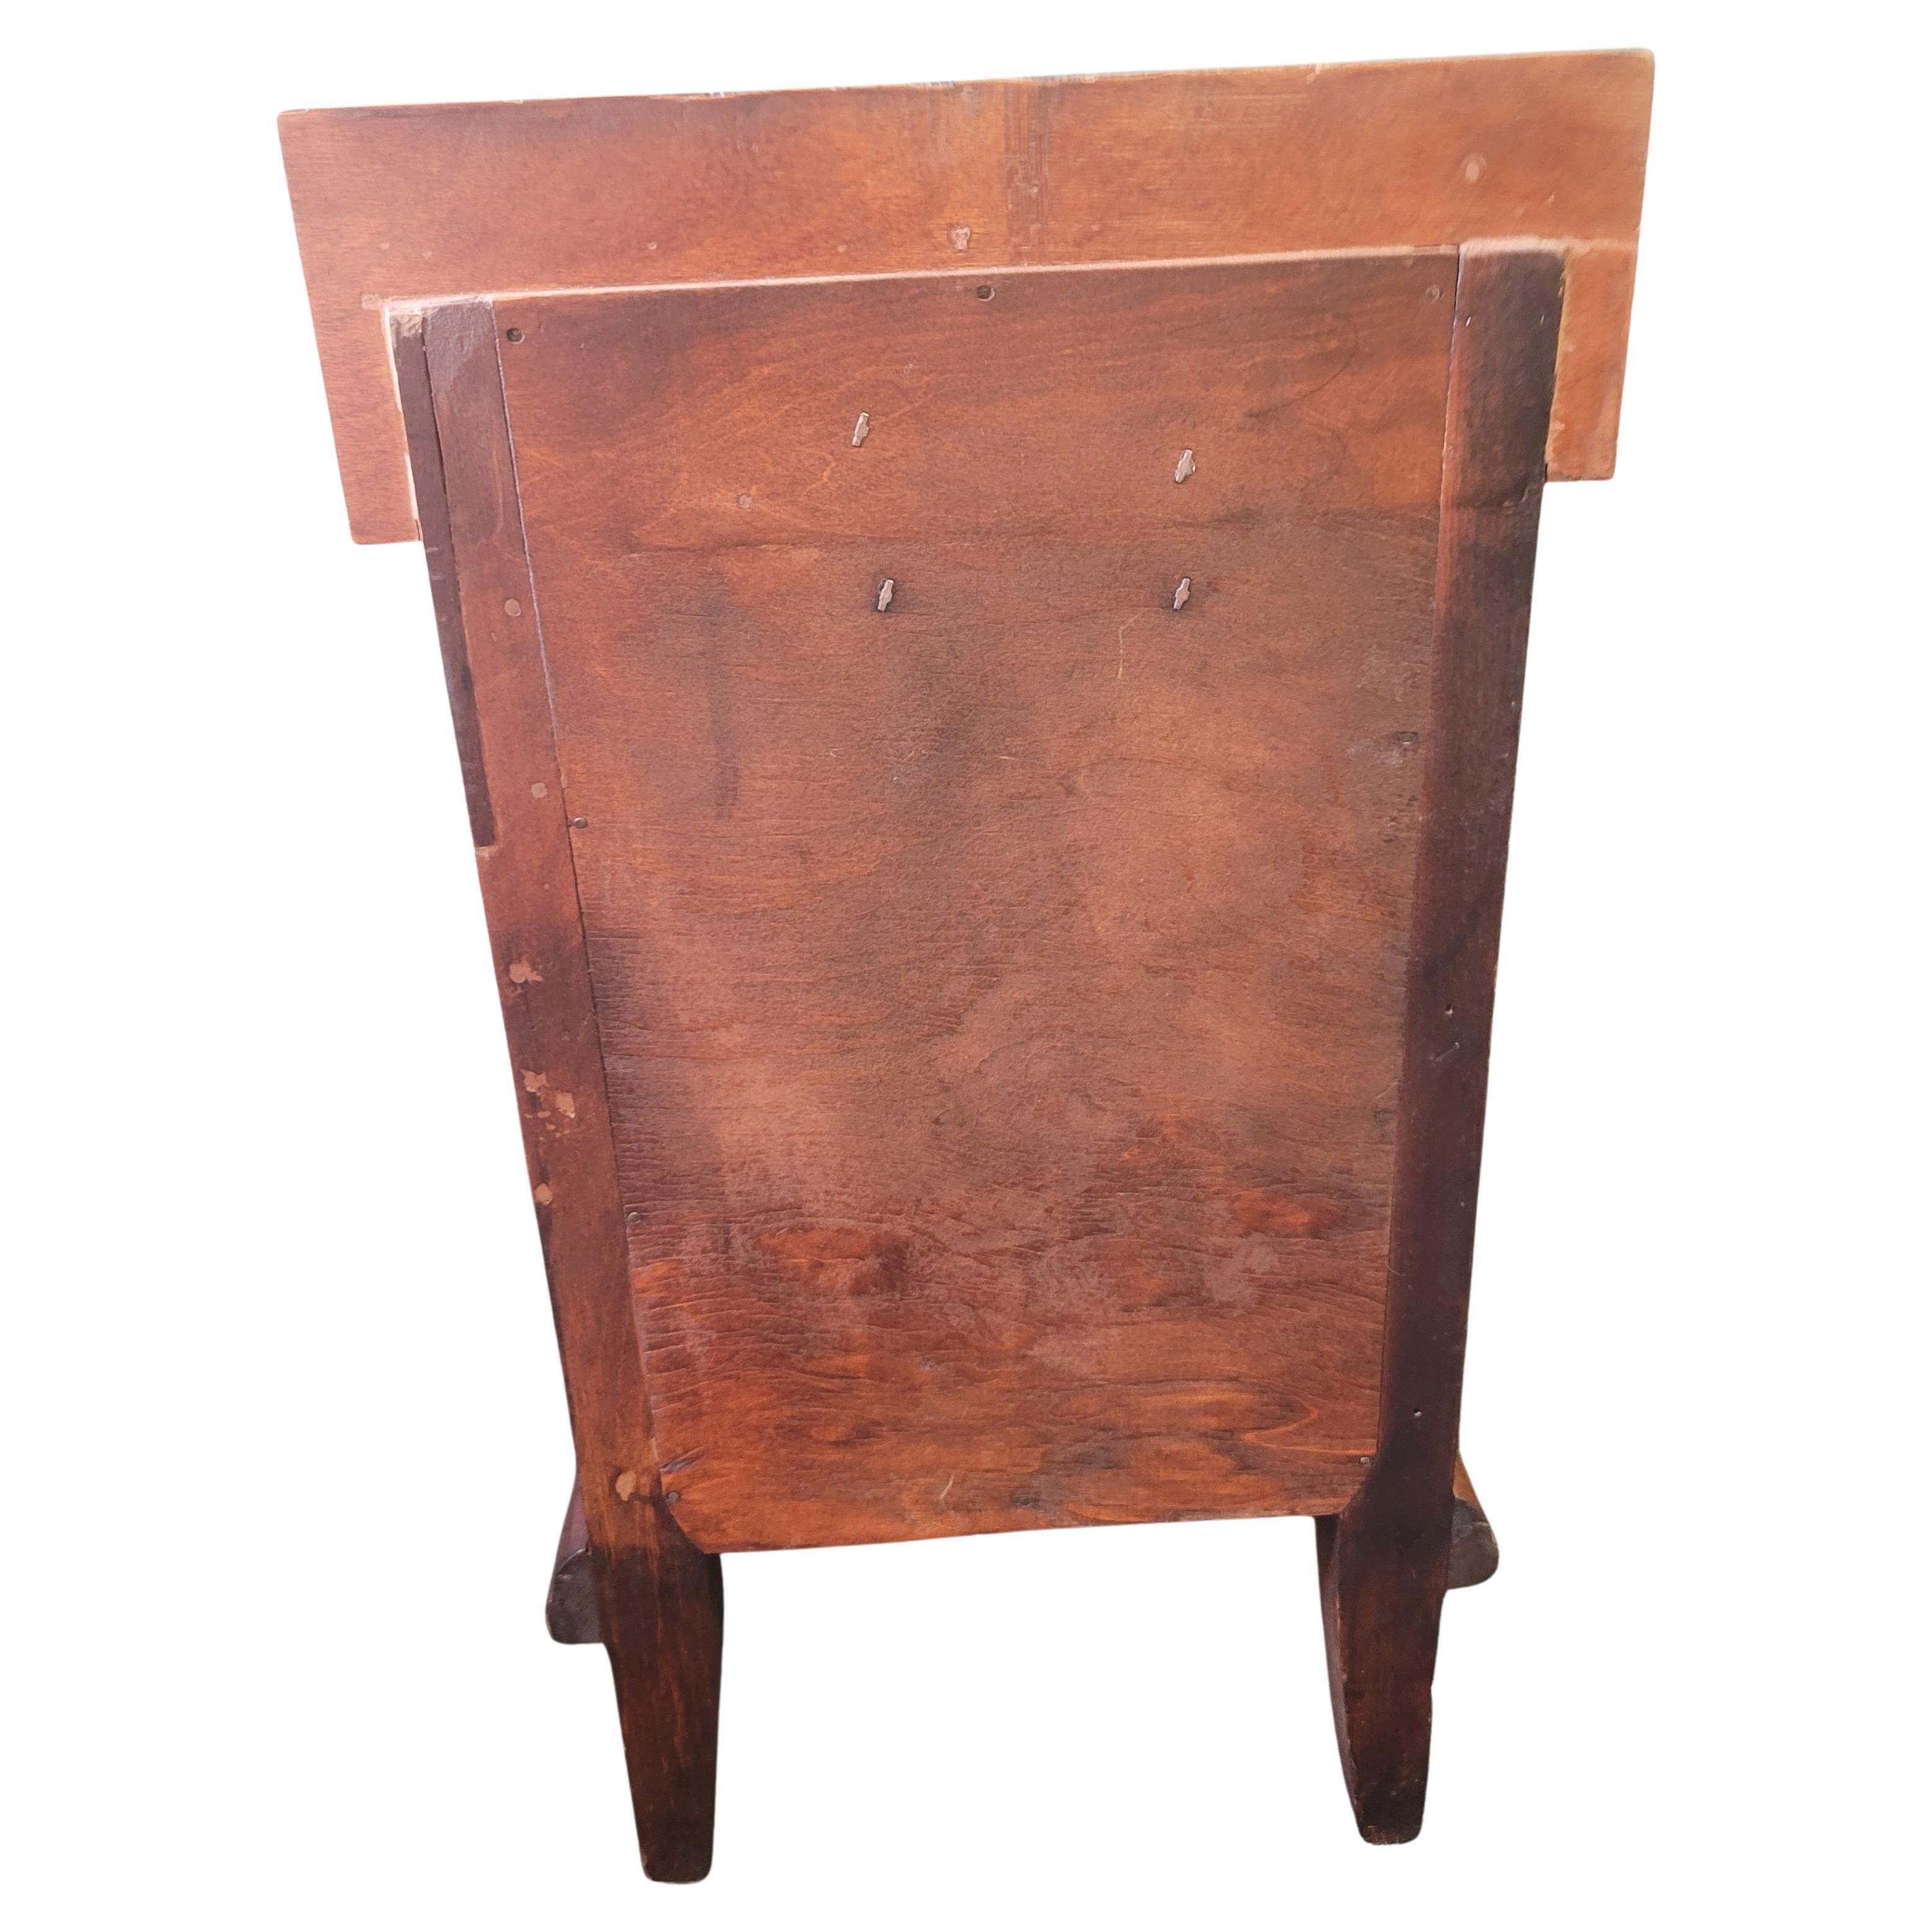 1930s Georgian Style Mahogany Bedside Chests Nightstands, a Pair In Good Condition For Sale In Germantown, MD